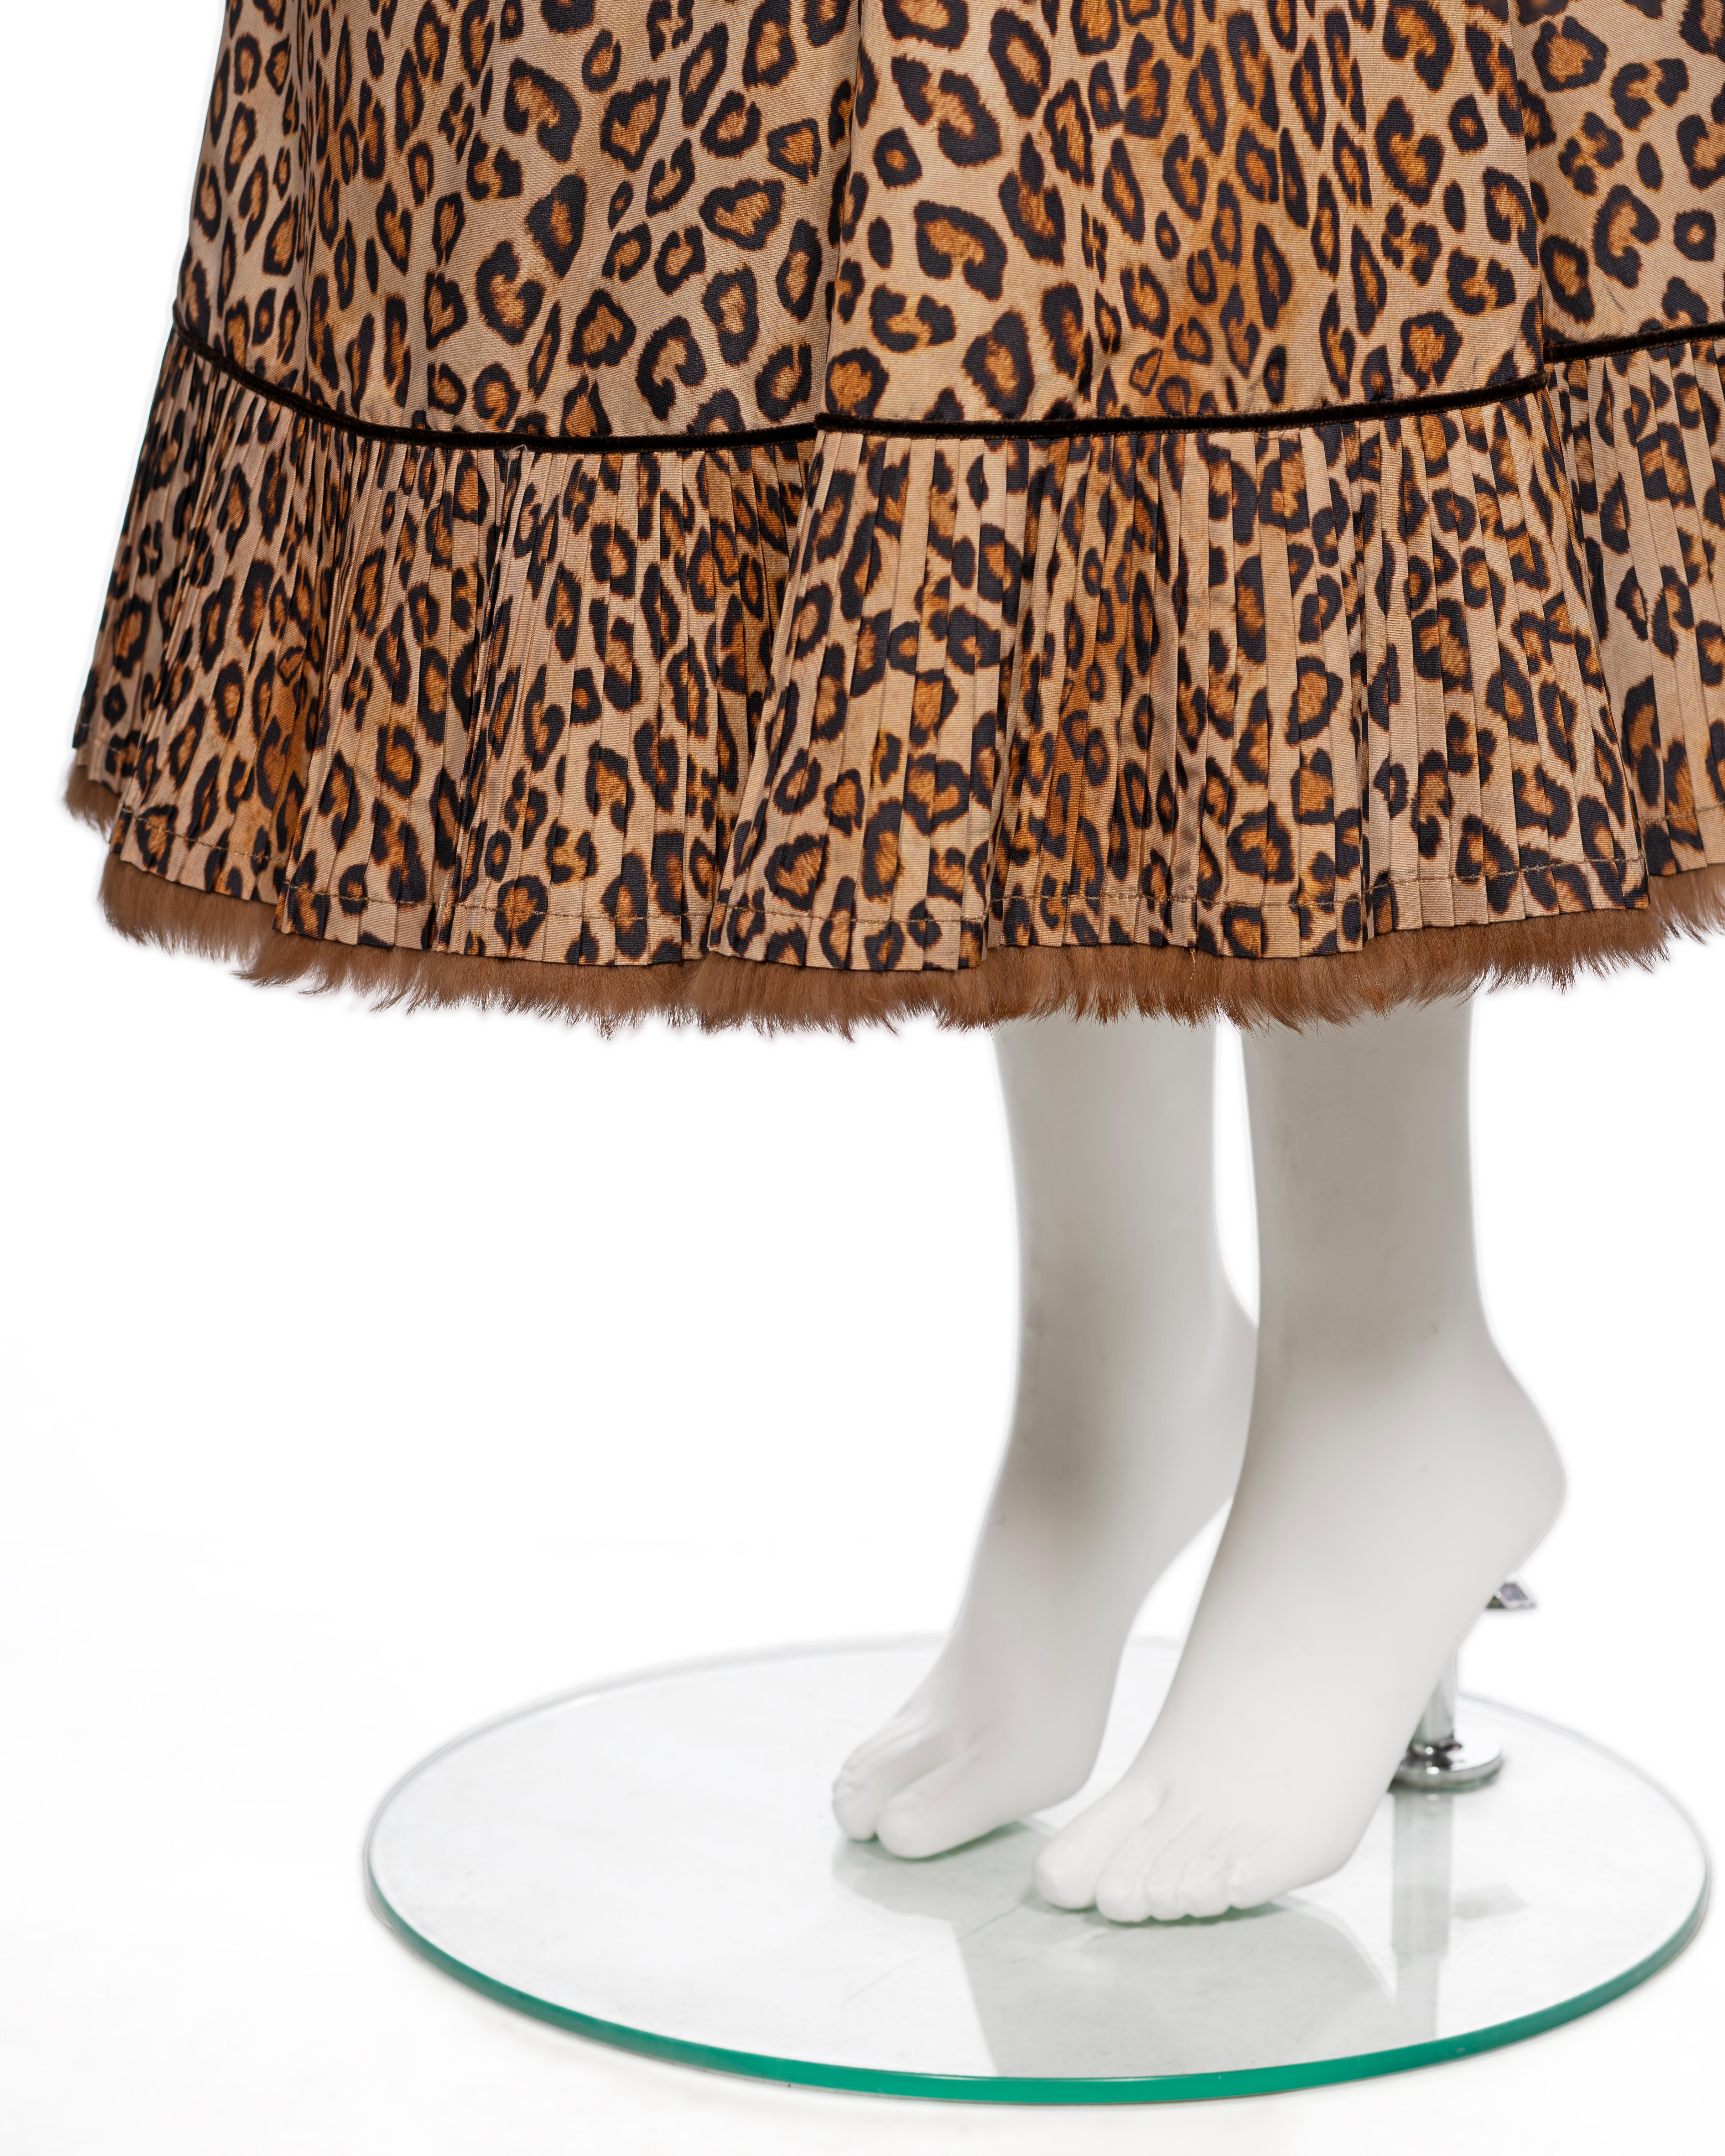 Alexander McQueen Leopard Print Silk and Fur Jacket and Skirt Suit, FW 2005 For Sale 6